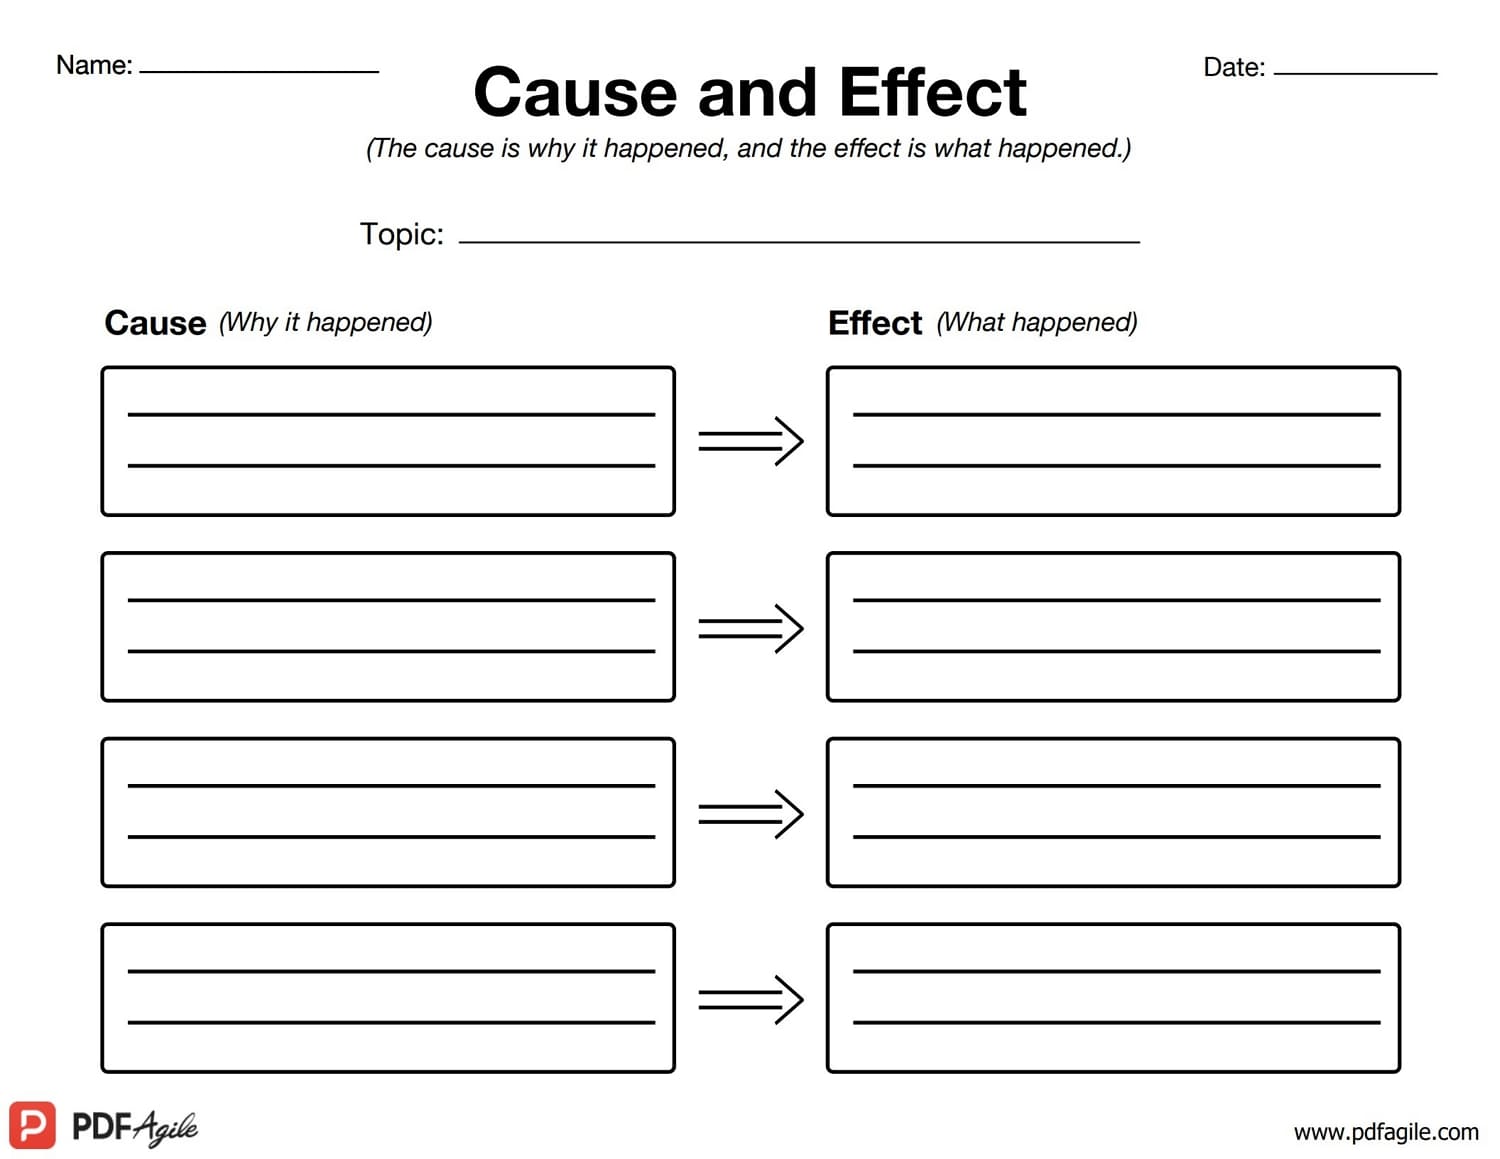 Cause-and-Effect Graphic Organizer